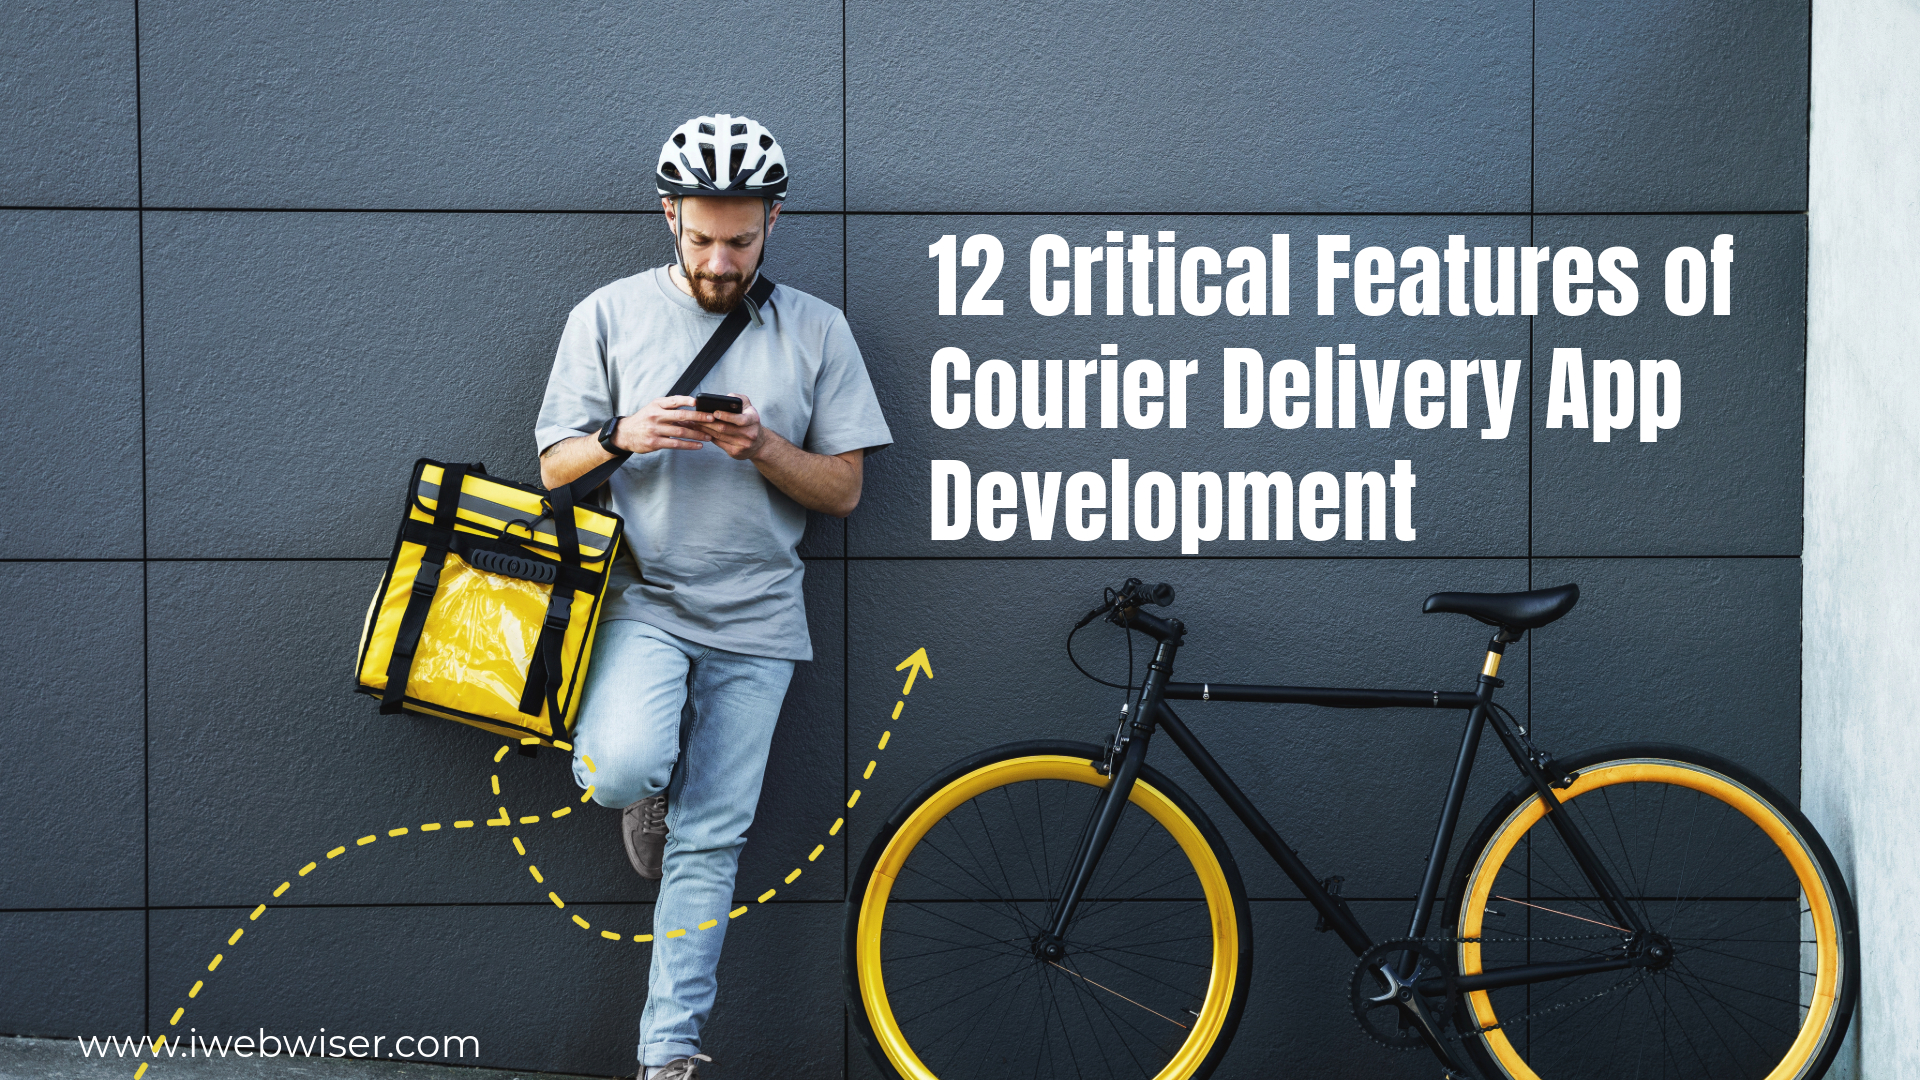 12-Critical-Features-of-Courier-Delivery-App-Development